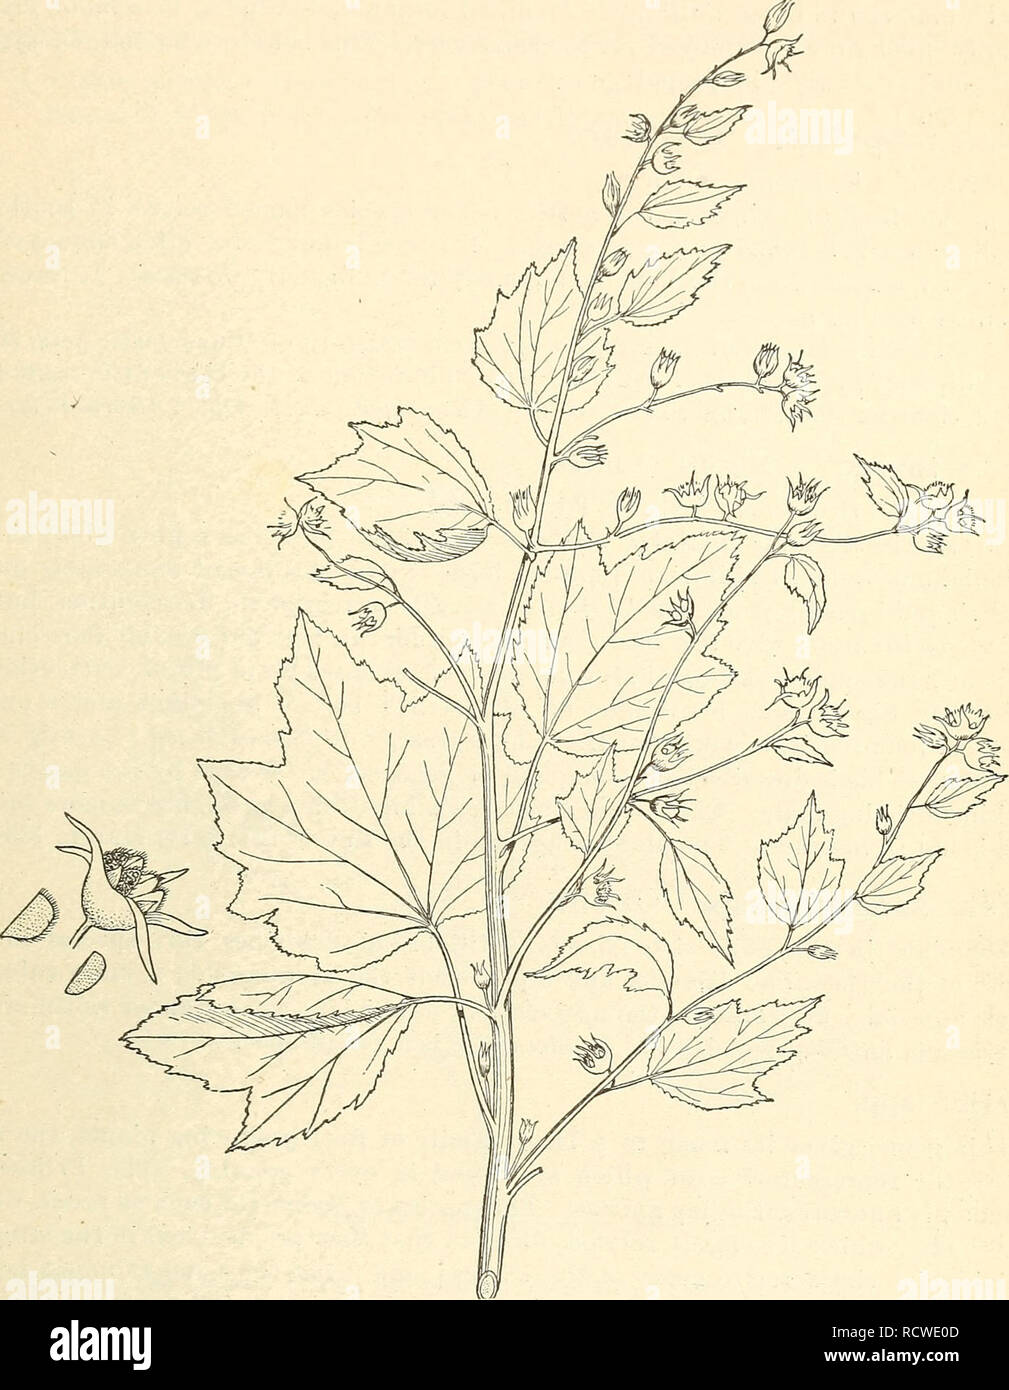 . A descriptive catalogue of useful fiber plants of the world, including the structural and economic classifications of fibers. Fibers. DESCRIPTIVE CATALOGUE. 321 Ureria lobata. Cjesae Weed. Exogen. Malvacecv. A small shrub. Common and native names.—Caesar weed (Fla.); Cadillo, (Venez.); Guaxima, or TJaixyma (Braz.); Bun-ochra (Intl.); Paita-appele (Ceyl.); Alc-iri (Yofiibaland). This species is almost cosmopolitan, as it is found in both temperate and tropical countries in many parts of the world. It is a very common species in many portions. Ftg. 101.—The Caspar weed, Urena lobata. of the Un Stock Photo